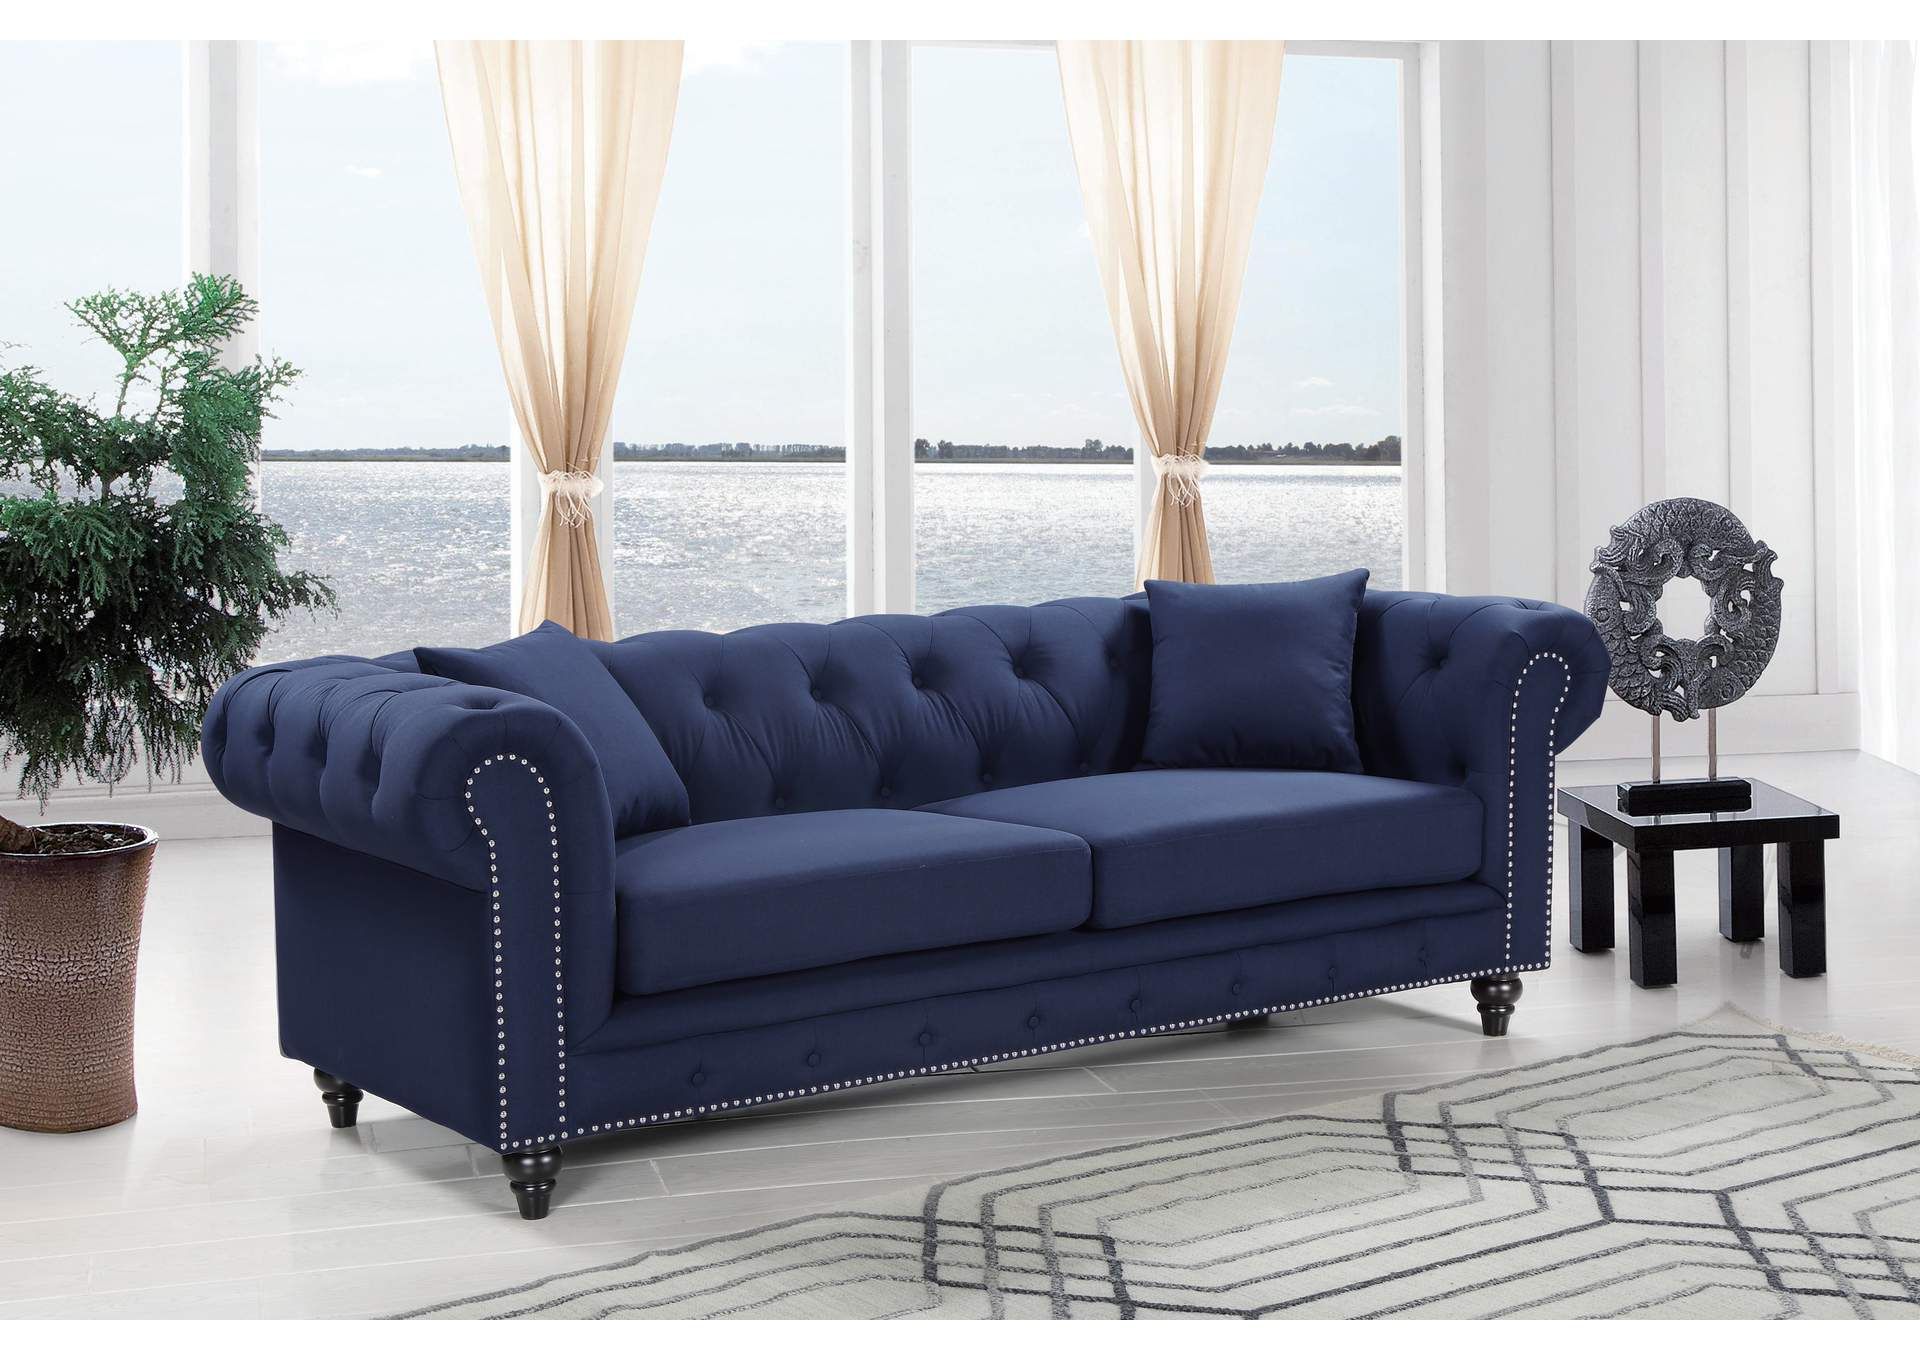 Chesterfield Navy Linen Sofa Best Buy Furniture And Mattress In Navy Linen Coil Sofas (Gallery 5 of 20)